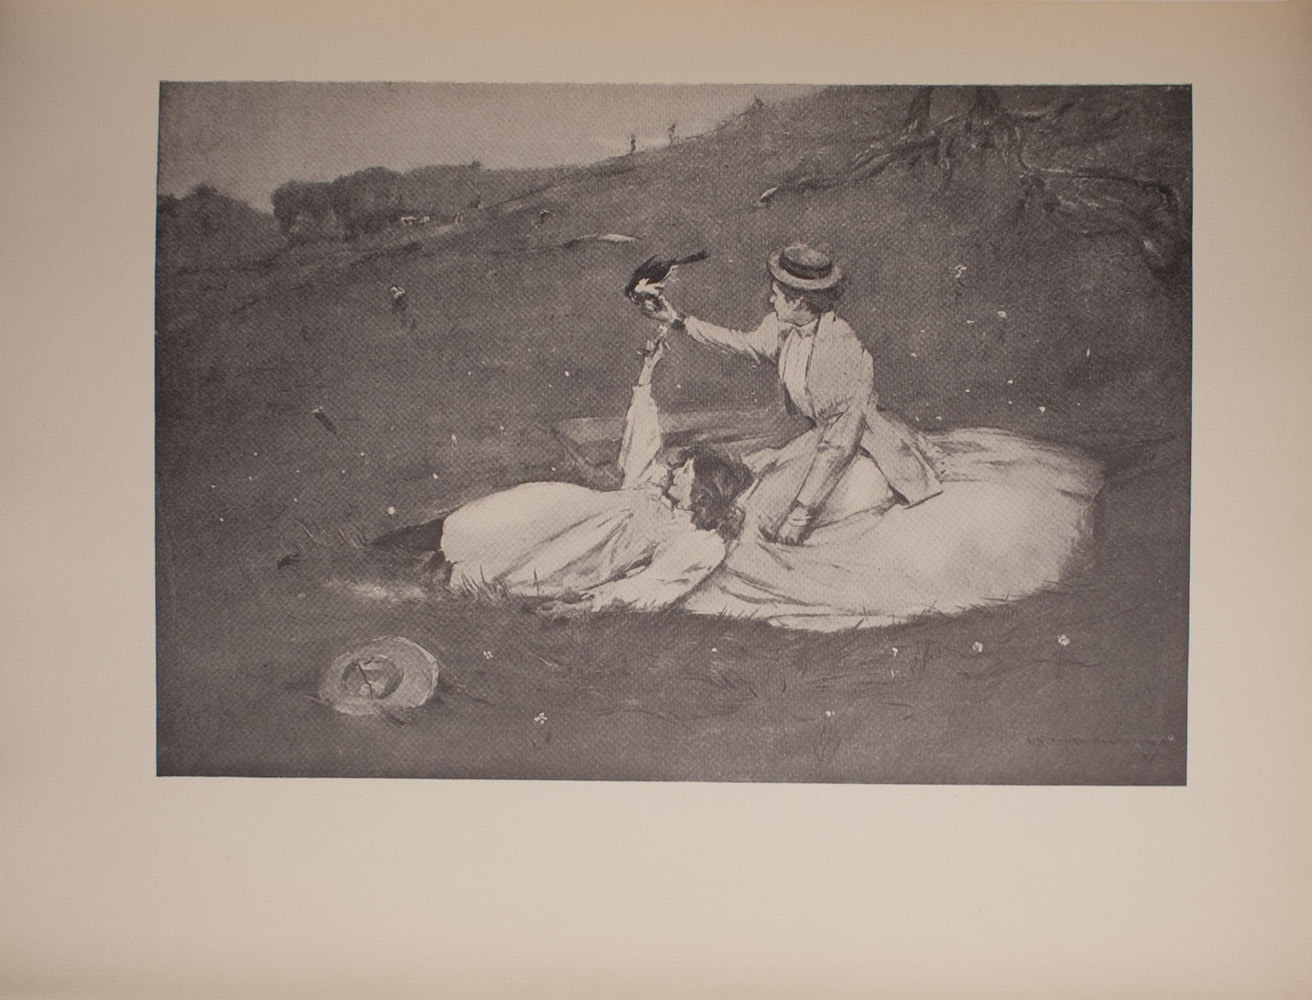 The image is of two women on a hillside One of the women is seated and wears a light coloured skirt with a light coloured jacket Her skirt is spread around her She is wearing a hat and her head is slightly turned away from the viewer Her right arm is extended and a black bird is resting on her fingers The other woman is to the left of the seated woman She is reclined and resting against the seated woman She is wearing a light coloured dress and her hair is down Her right arm is extended towards the black bird She is in profile and smiling Next to the reclining woman further in the foreground is a hat Beyond the two women large tree roots are visible In the background there are more trees and hills Two figures are visible climbing up the hill in the far background There are light coloured flowers around the women The image is horizontally displayed